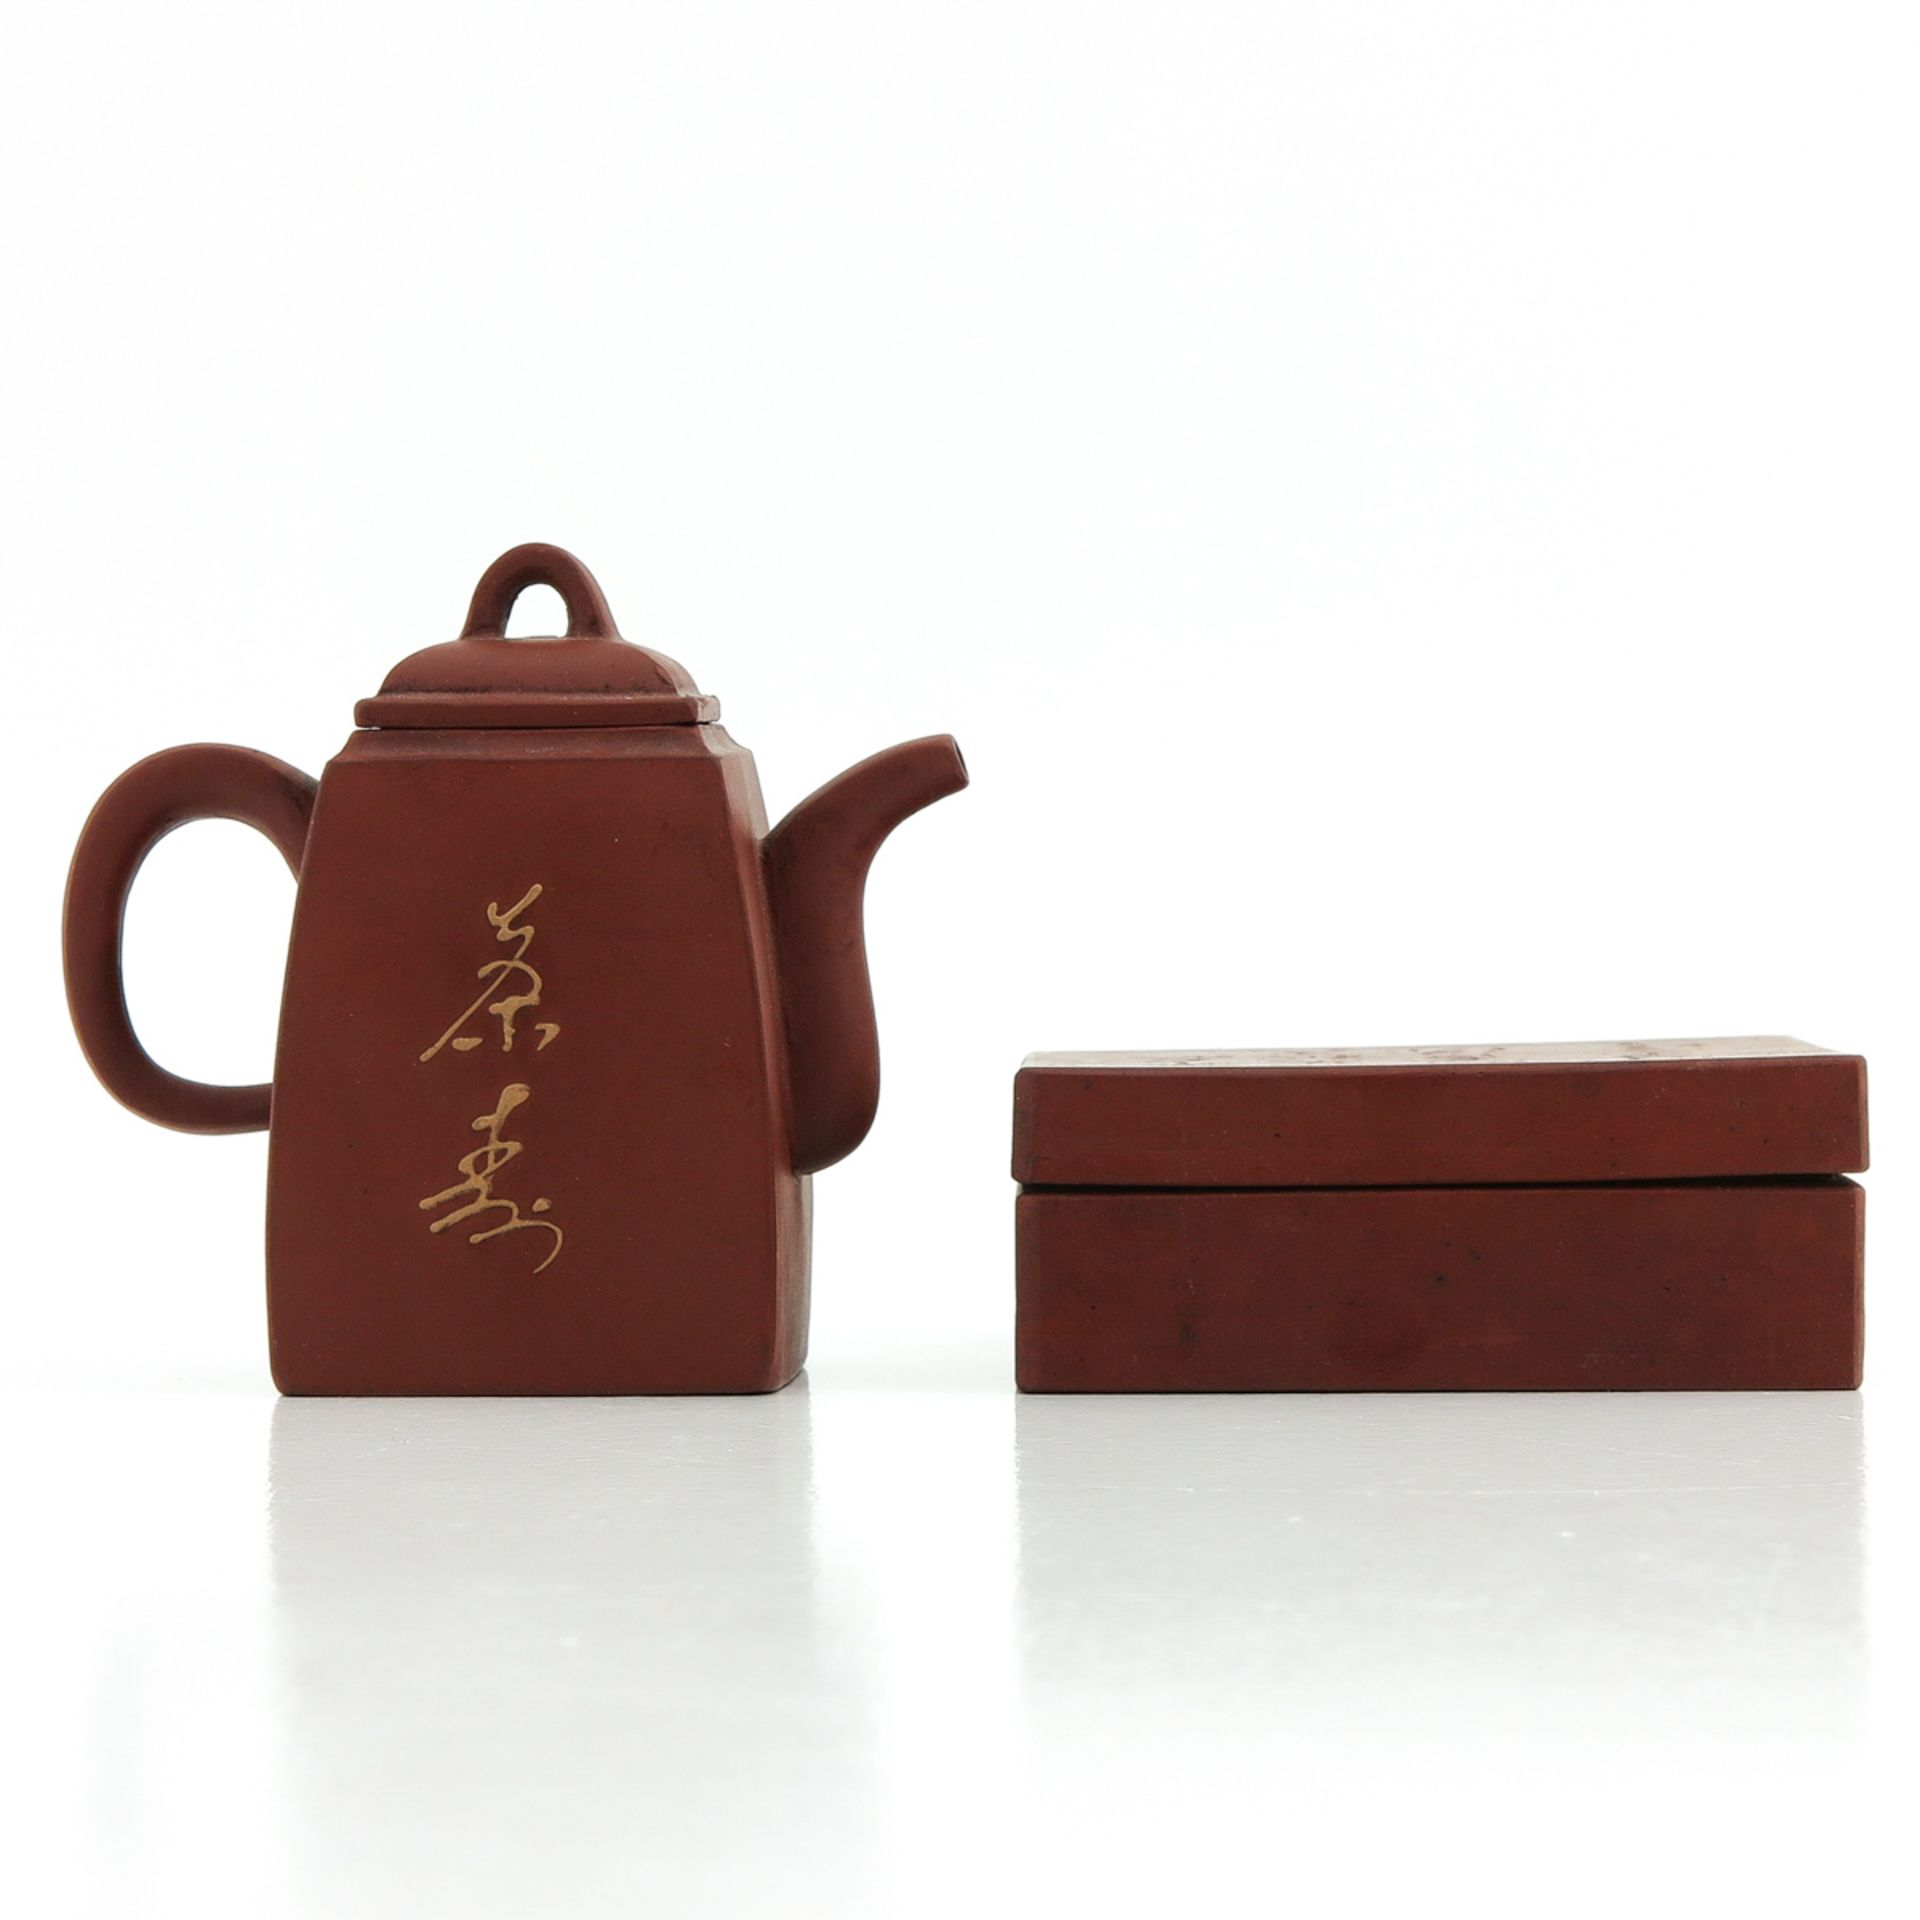 A Yixing Teapot and Box - Image 3 of 10